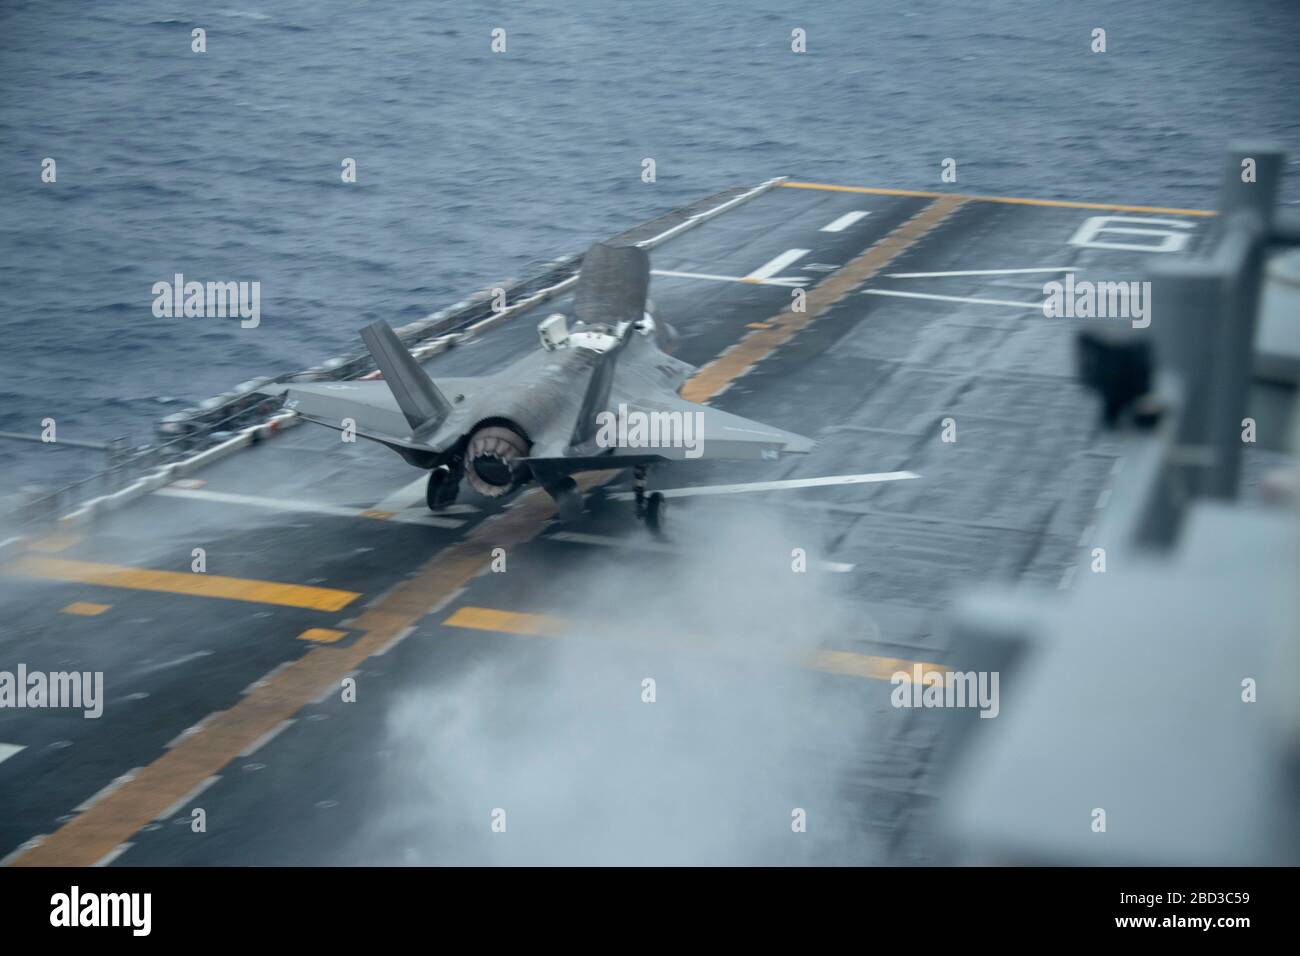 A U.S. Marine Corps F-35B Lightning II stealth fighter, assigned to the 31st Marine Expeditionary Unit, performs a vertical landing on the flight deck of the Flagship America-class amphibious assault ship USS America during routine operations April 4, 2020 in the Philippine Sea. Stock Photo